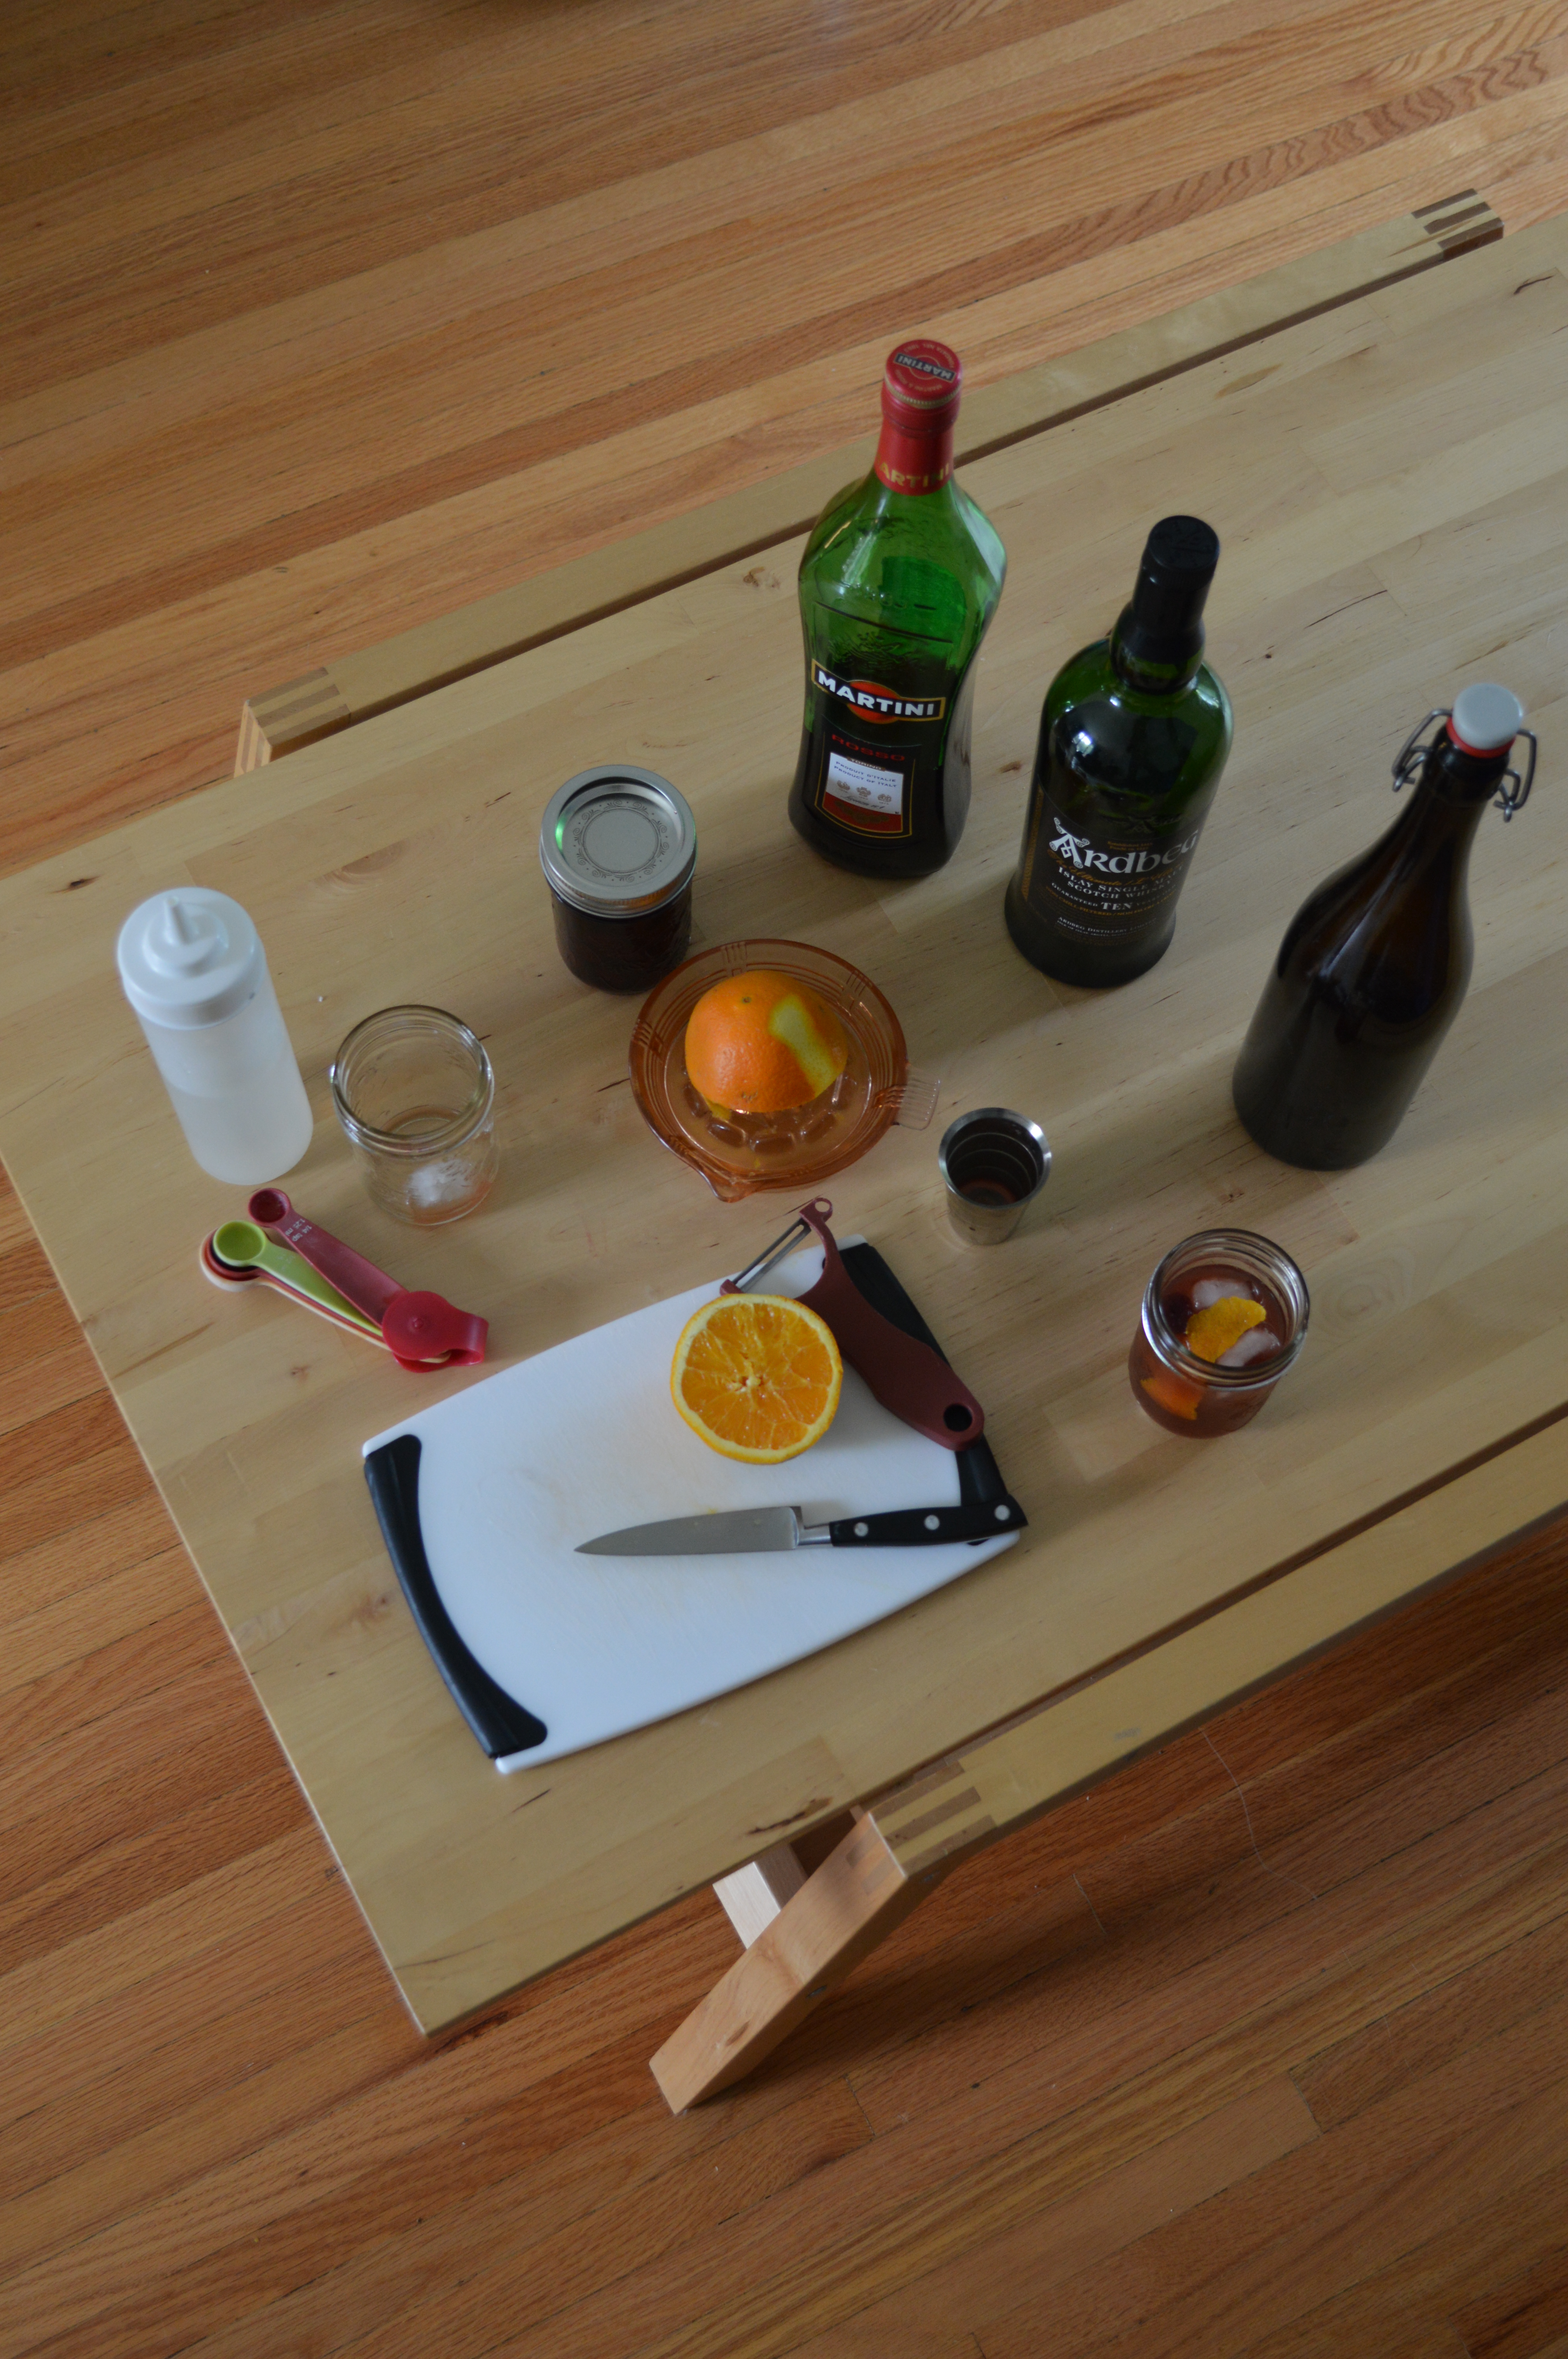 The ingredients and equipment needed to make an interesting twist on the classic Blood and Sand cocktail.